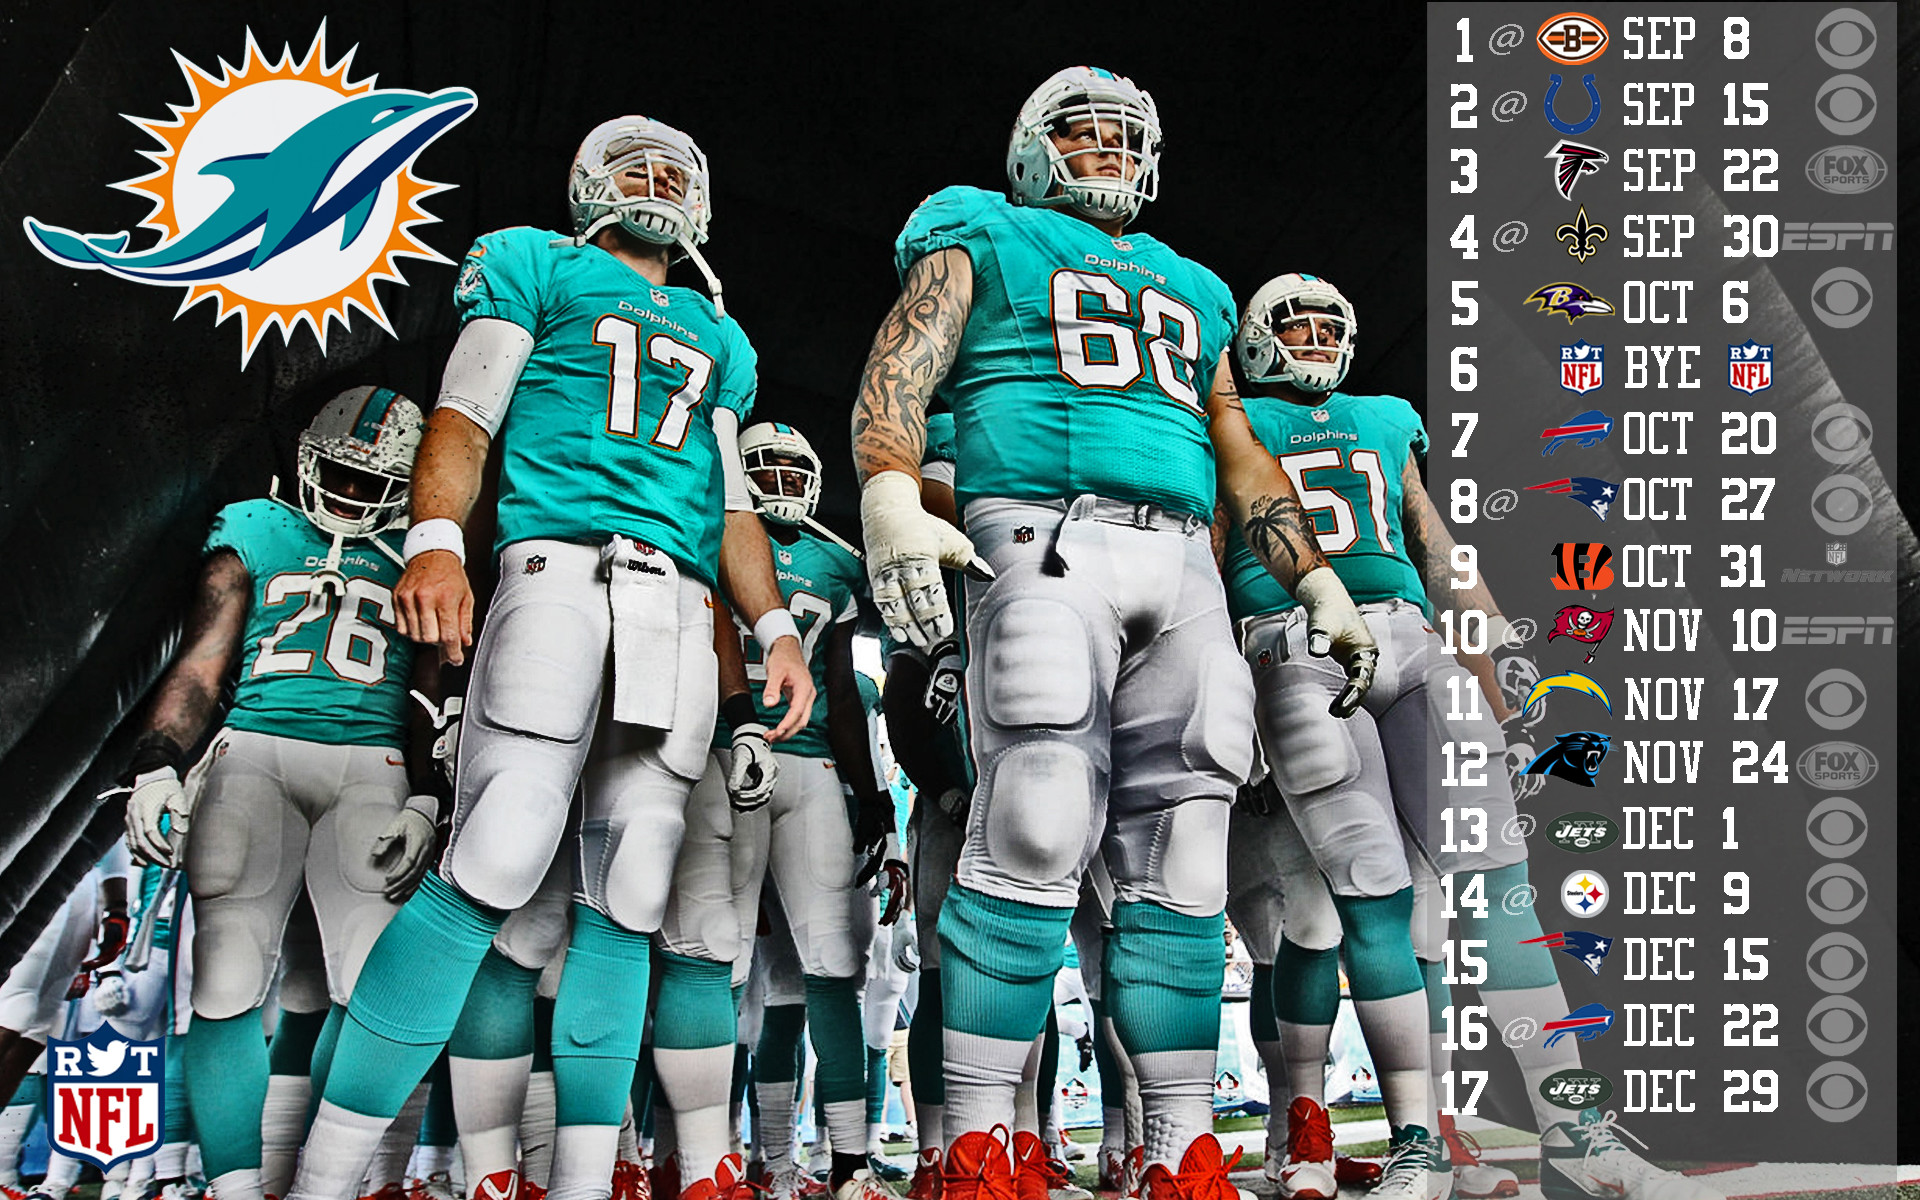 1920x1200 Dolphins wallpapers schedule hd.